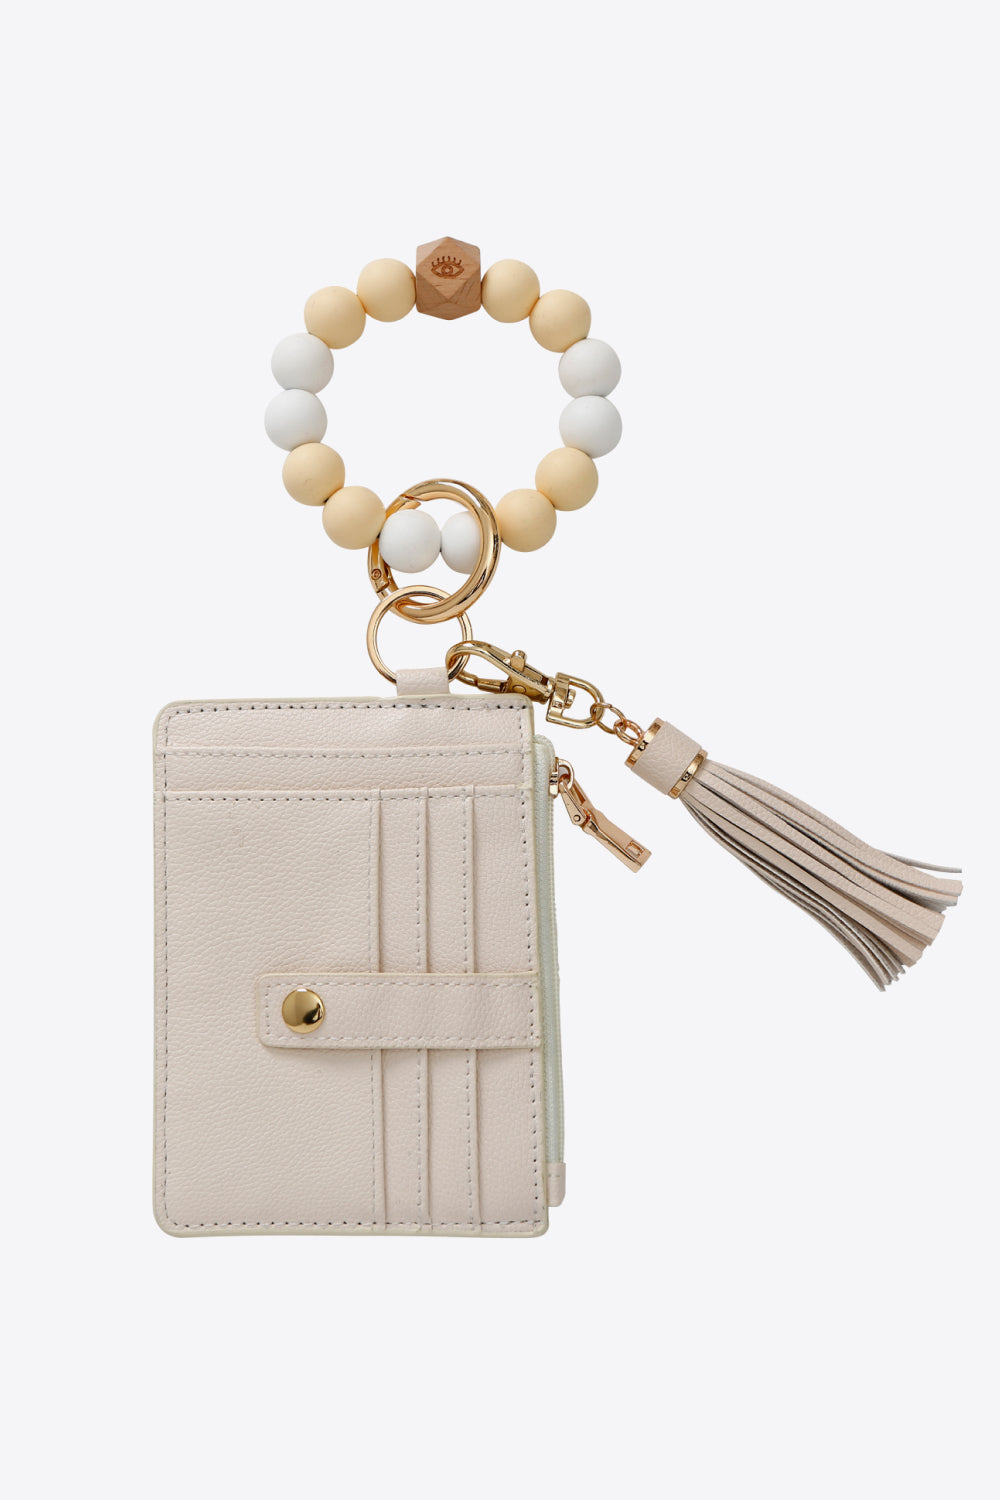 Beaded Bracelet Keychain with Wallet - ONLINE EXCLUSIVE